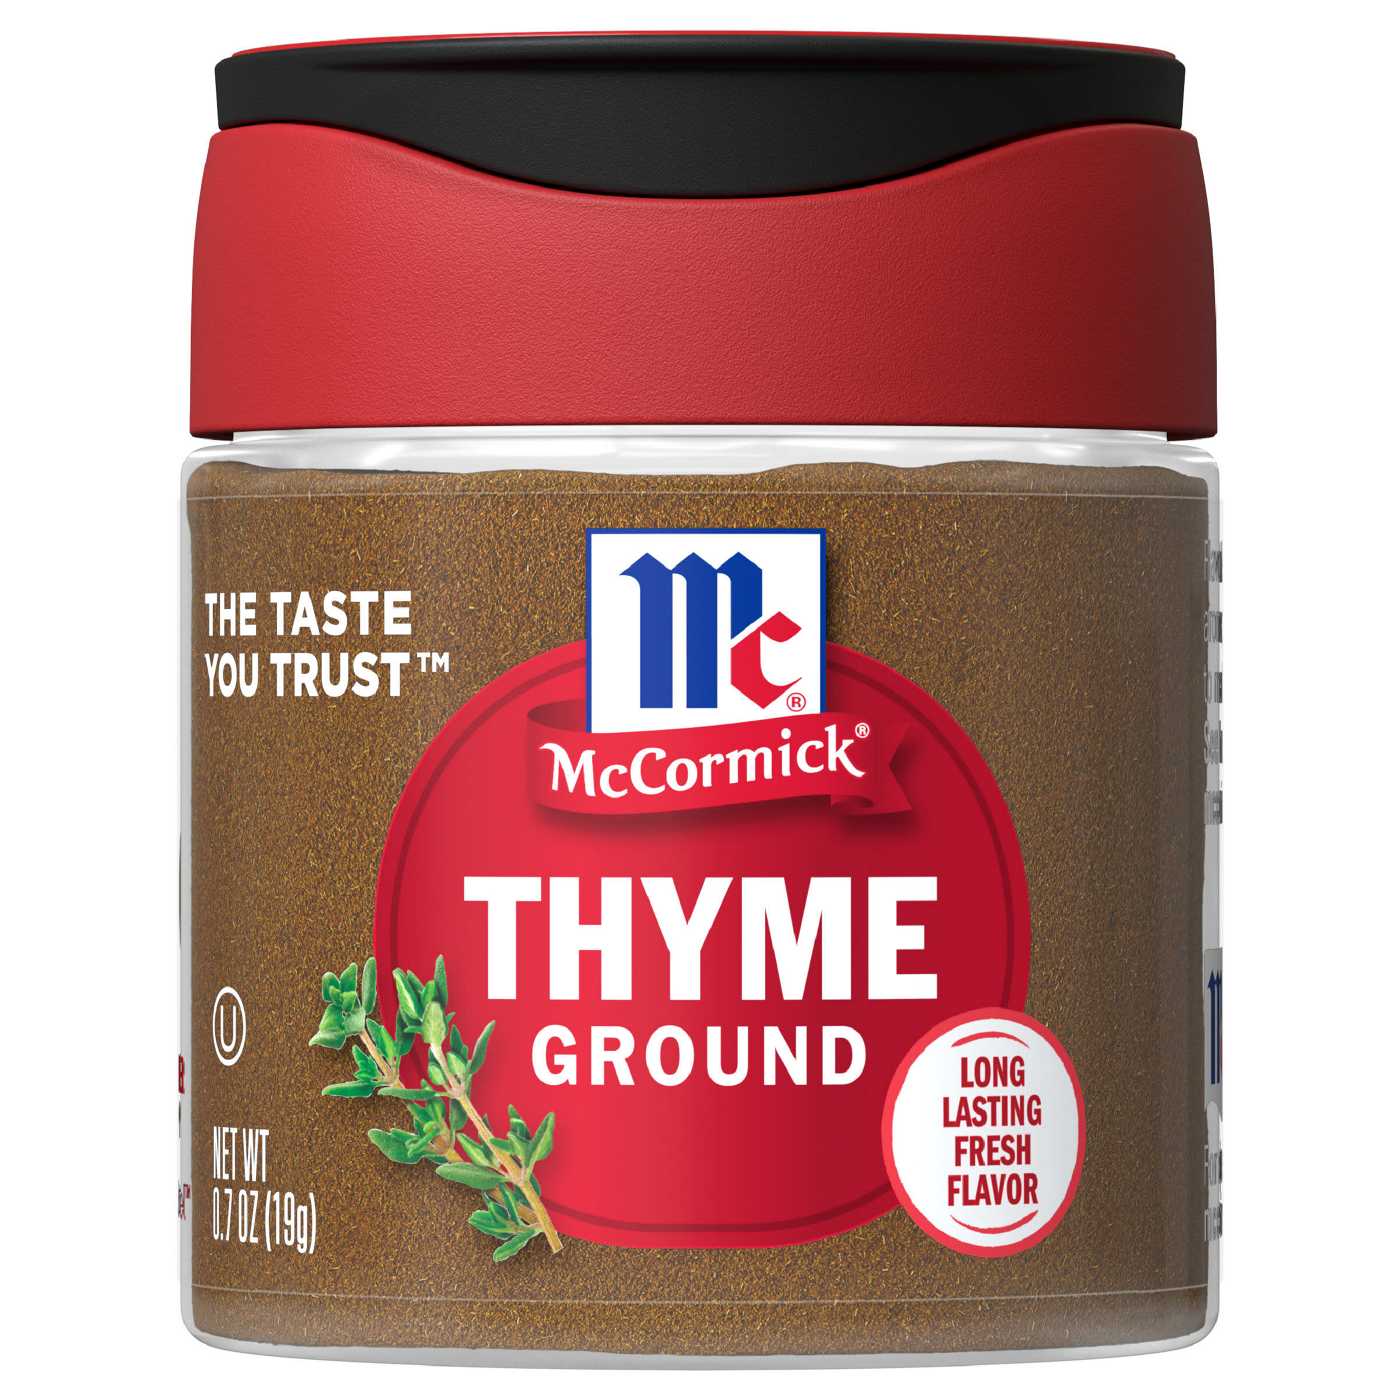 McCormick Ground Thyme; image 1 of 8